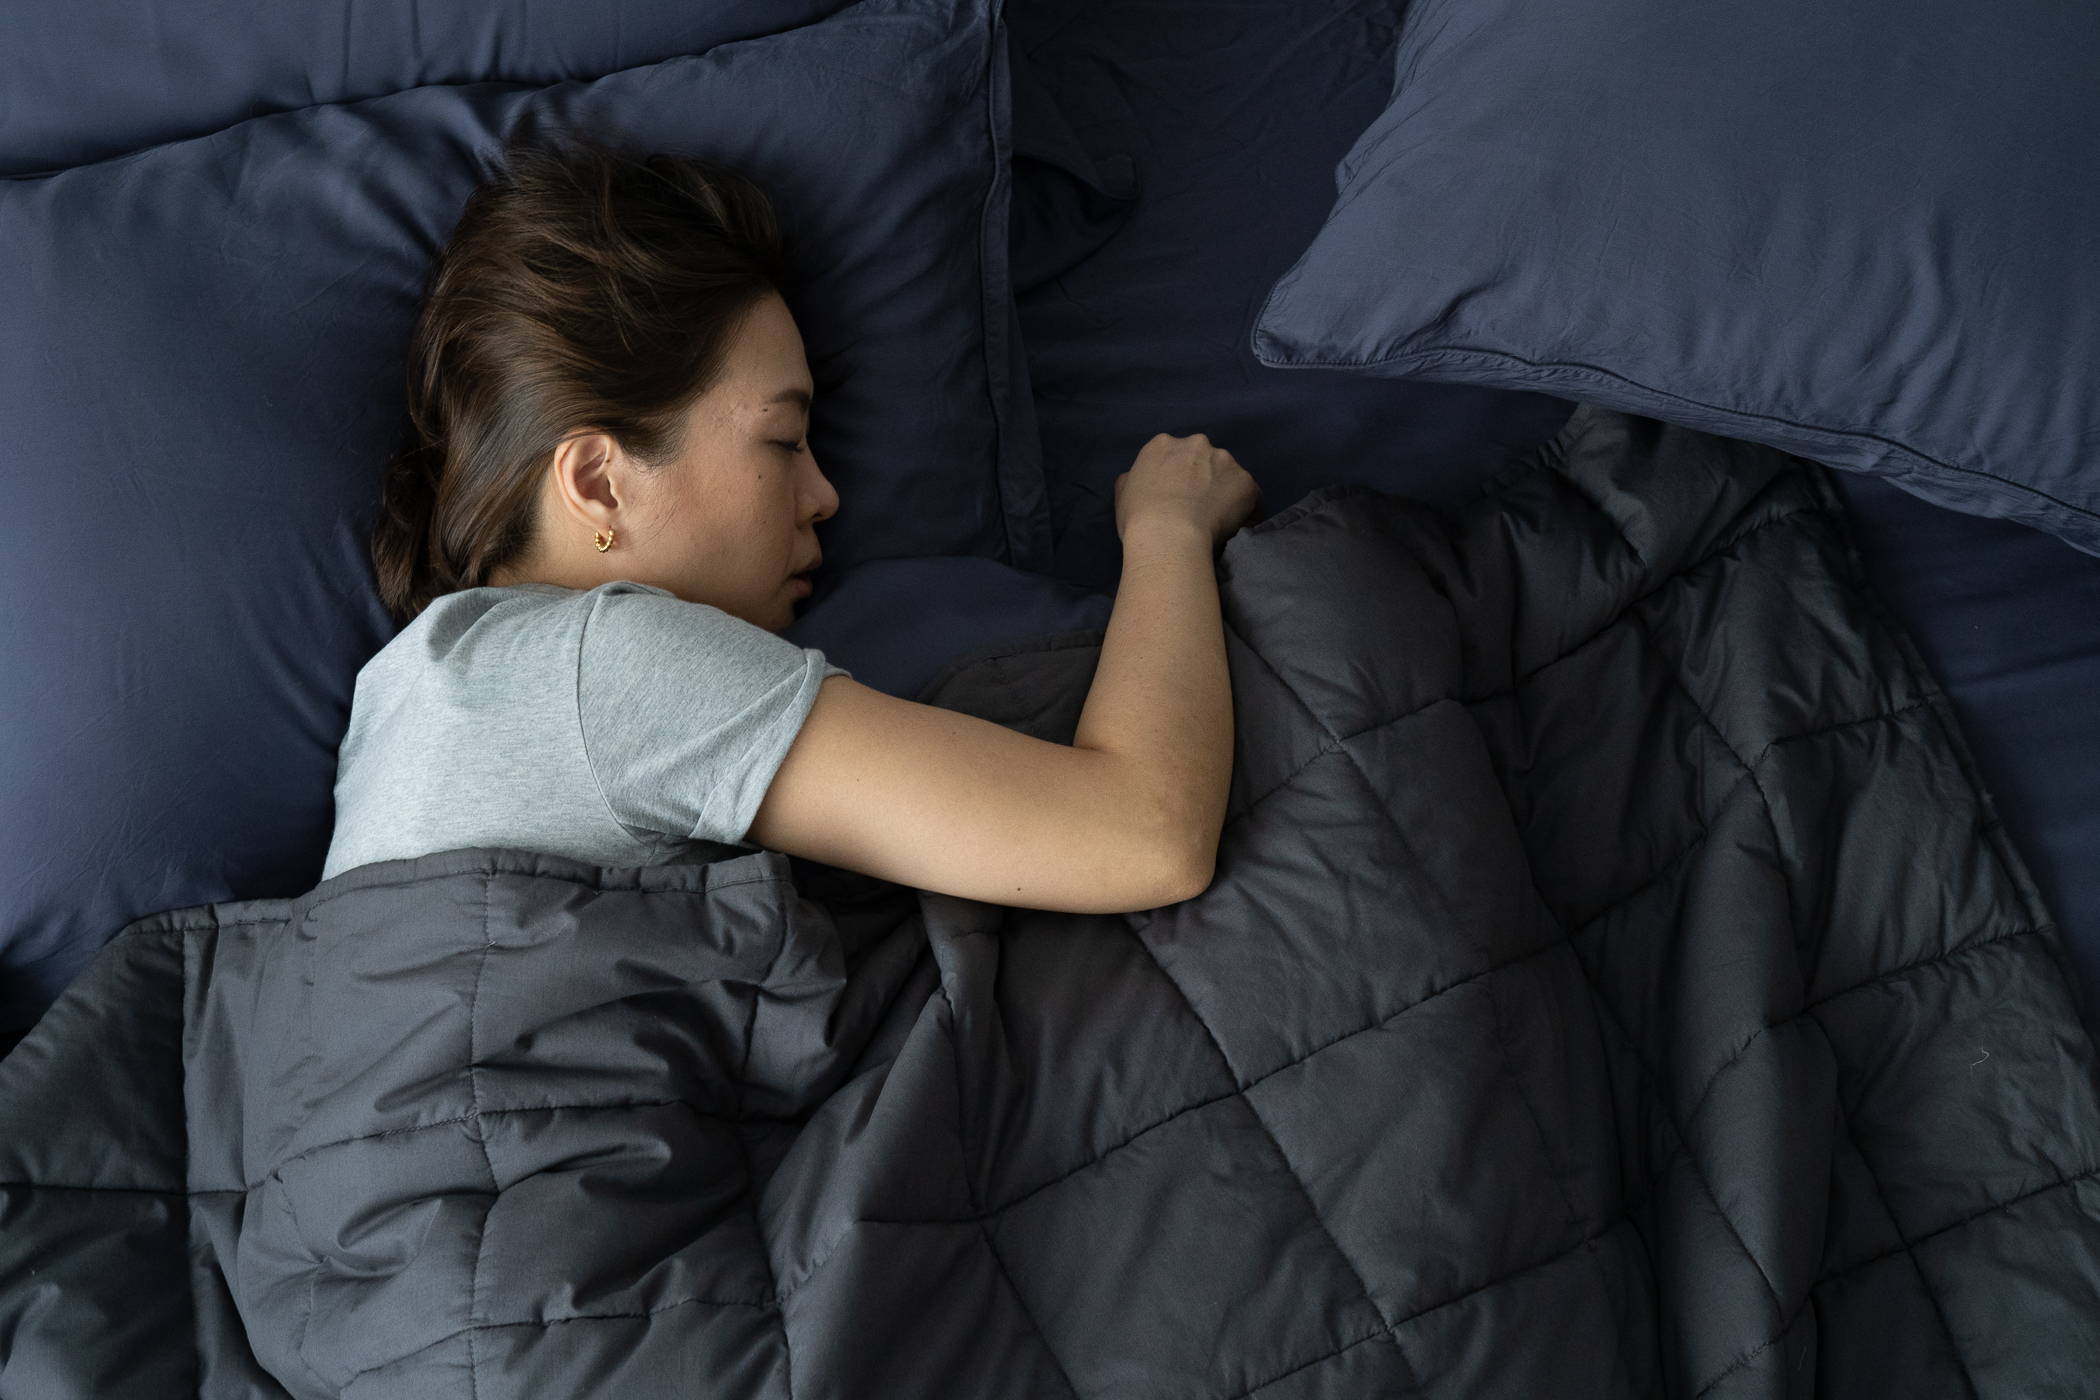 Midshot of woman sleeping on bed with pillows and weighted blanket